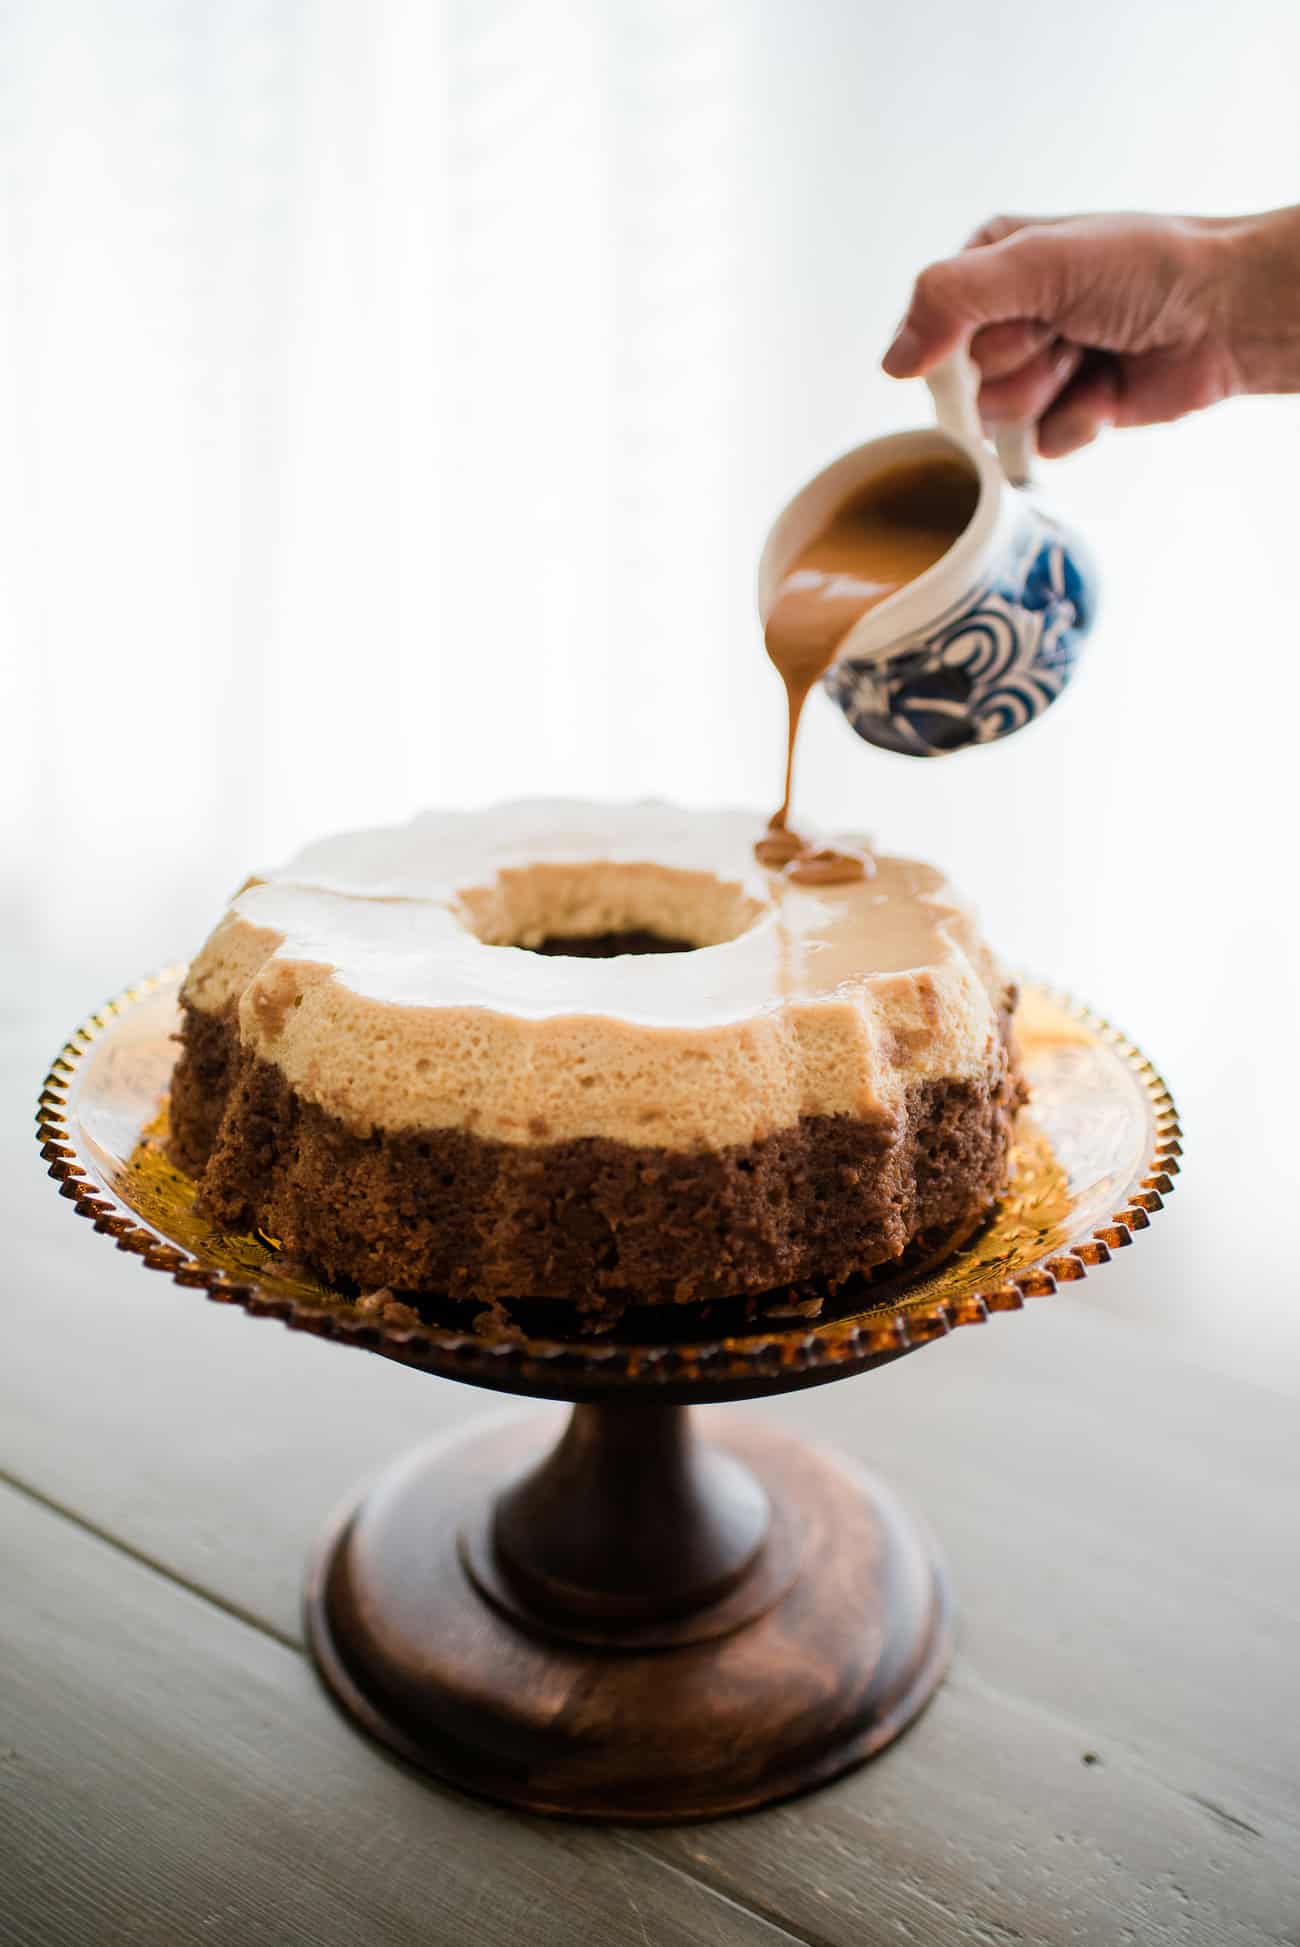 A hand pouring dulce de leche over a homemade chocoflan aka impossible cake.